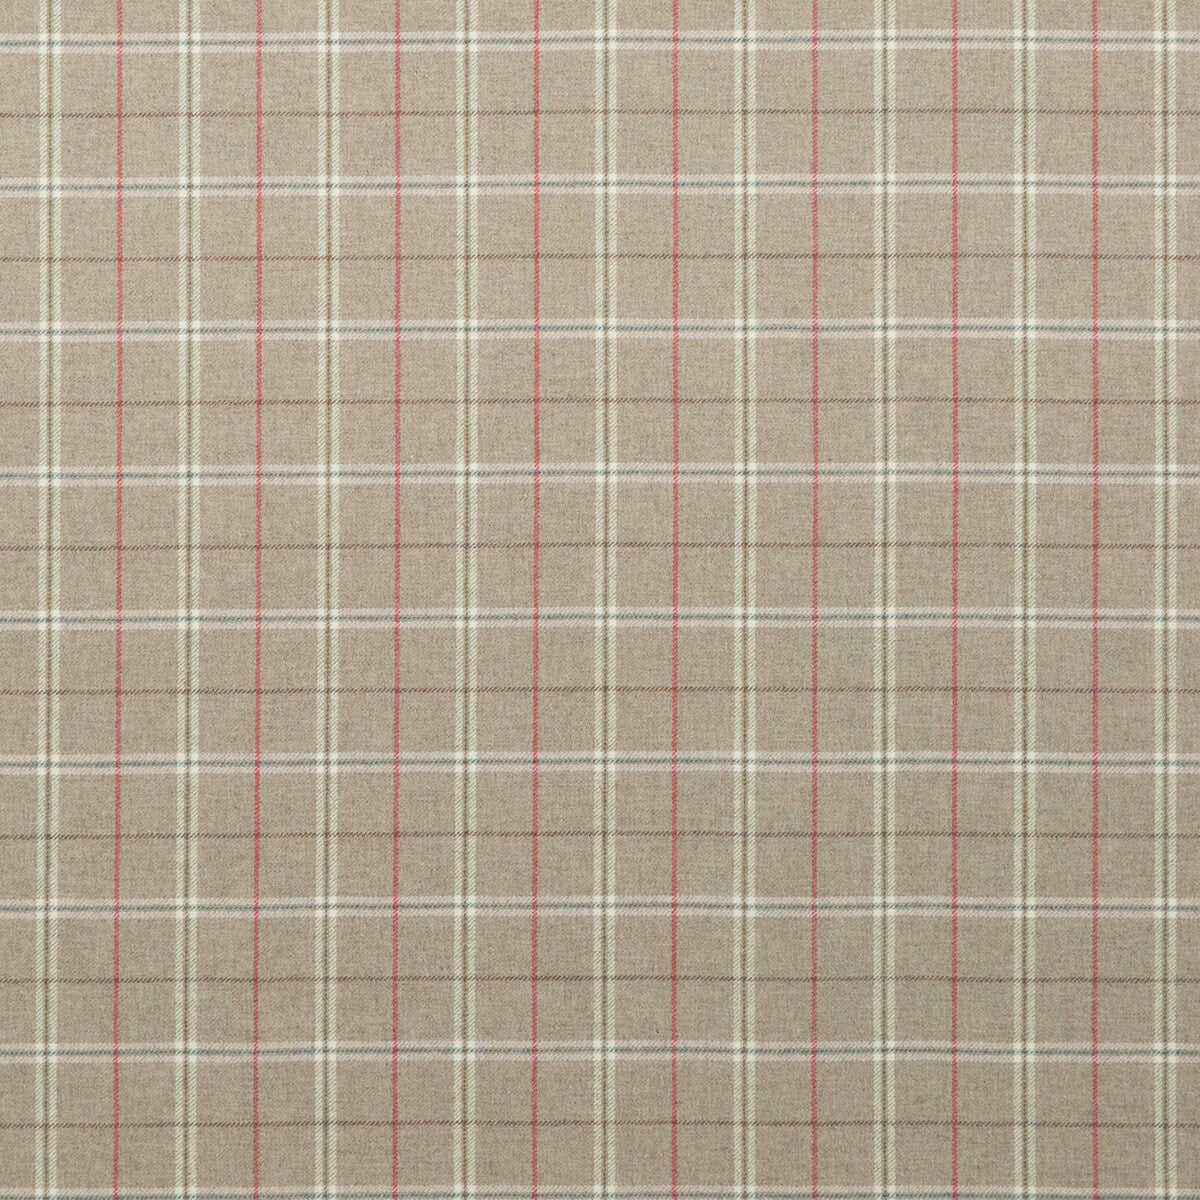 Islay fabric in stone color - pattern FD700.K102.0 - by Mulberry in the Bohemian Romance collection